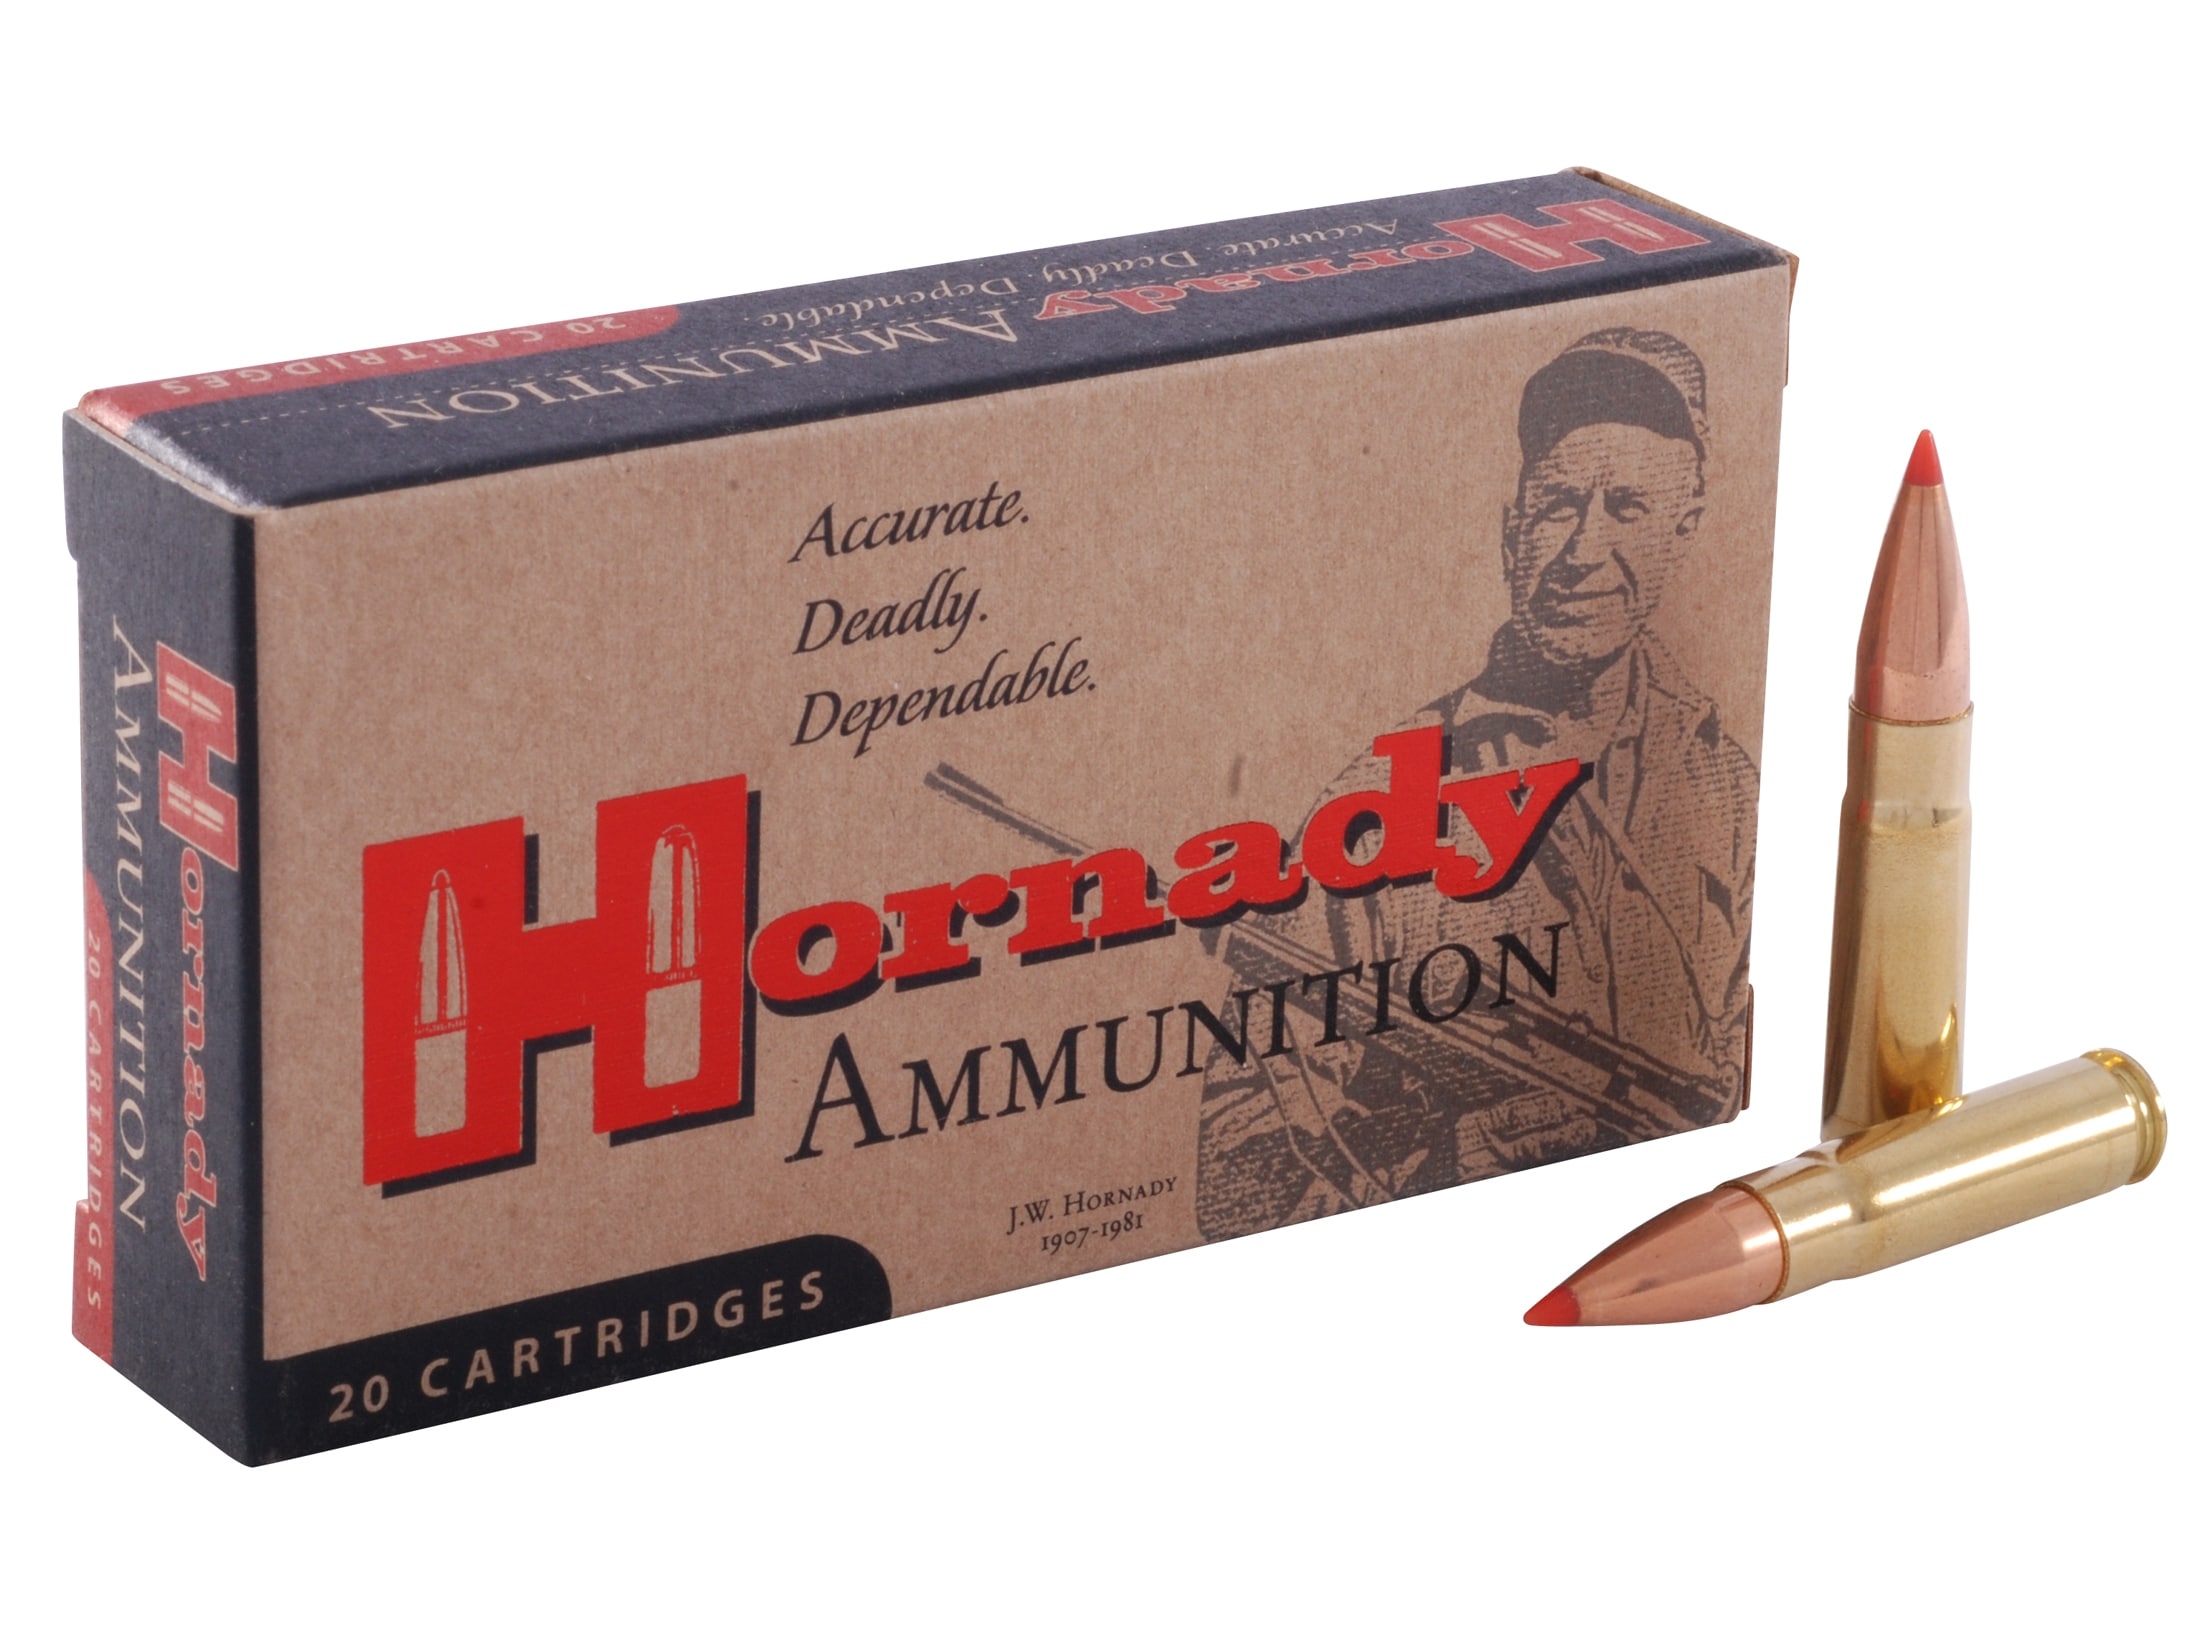 hornady 300 blackout subsonic for pigs